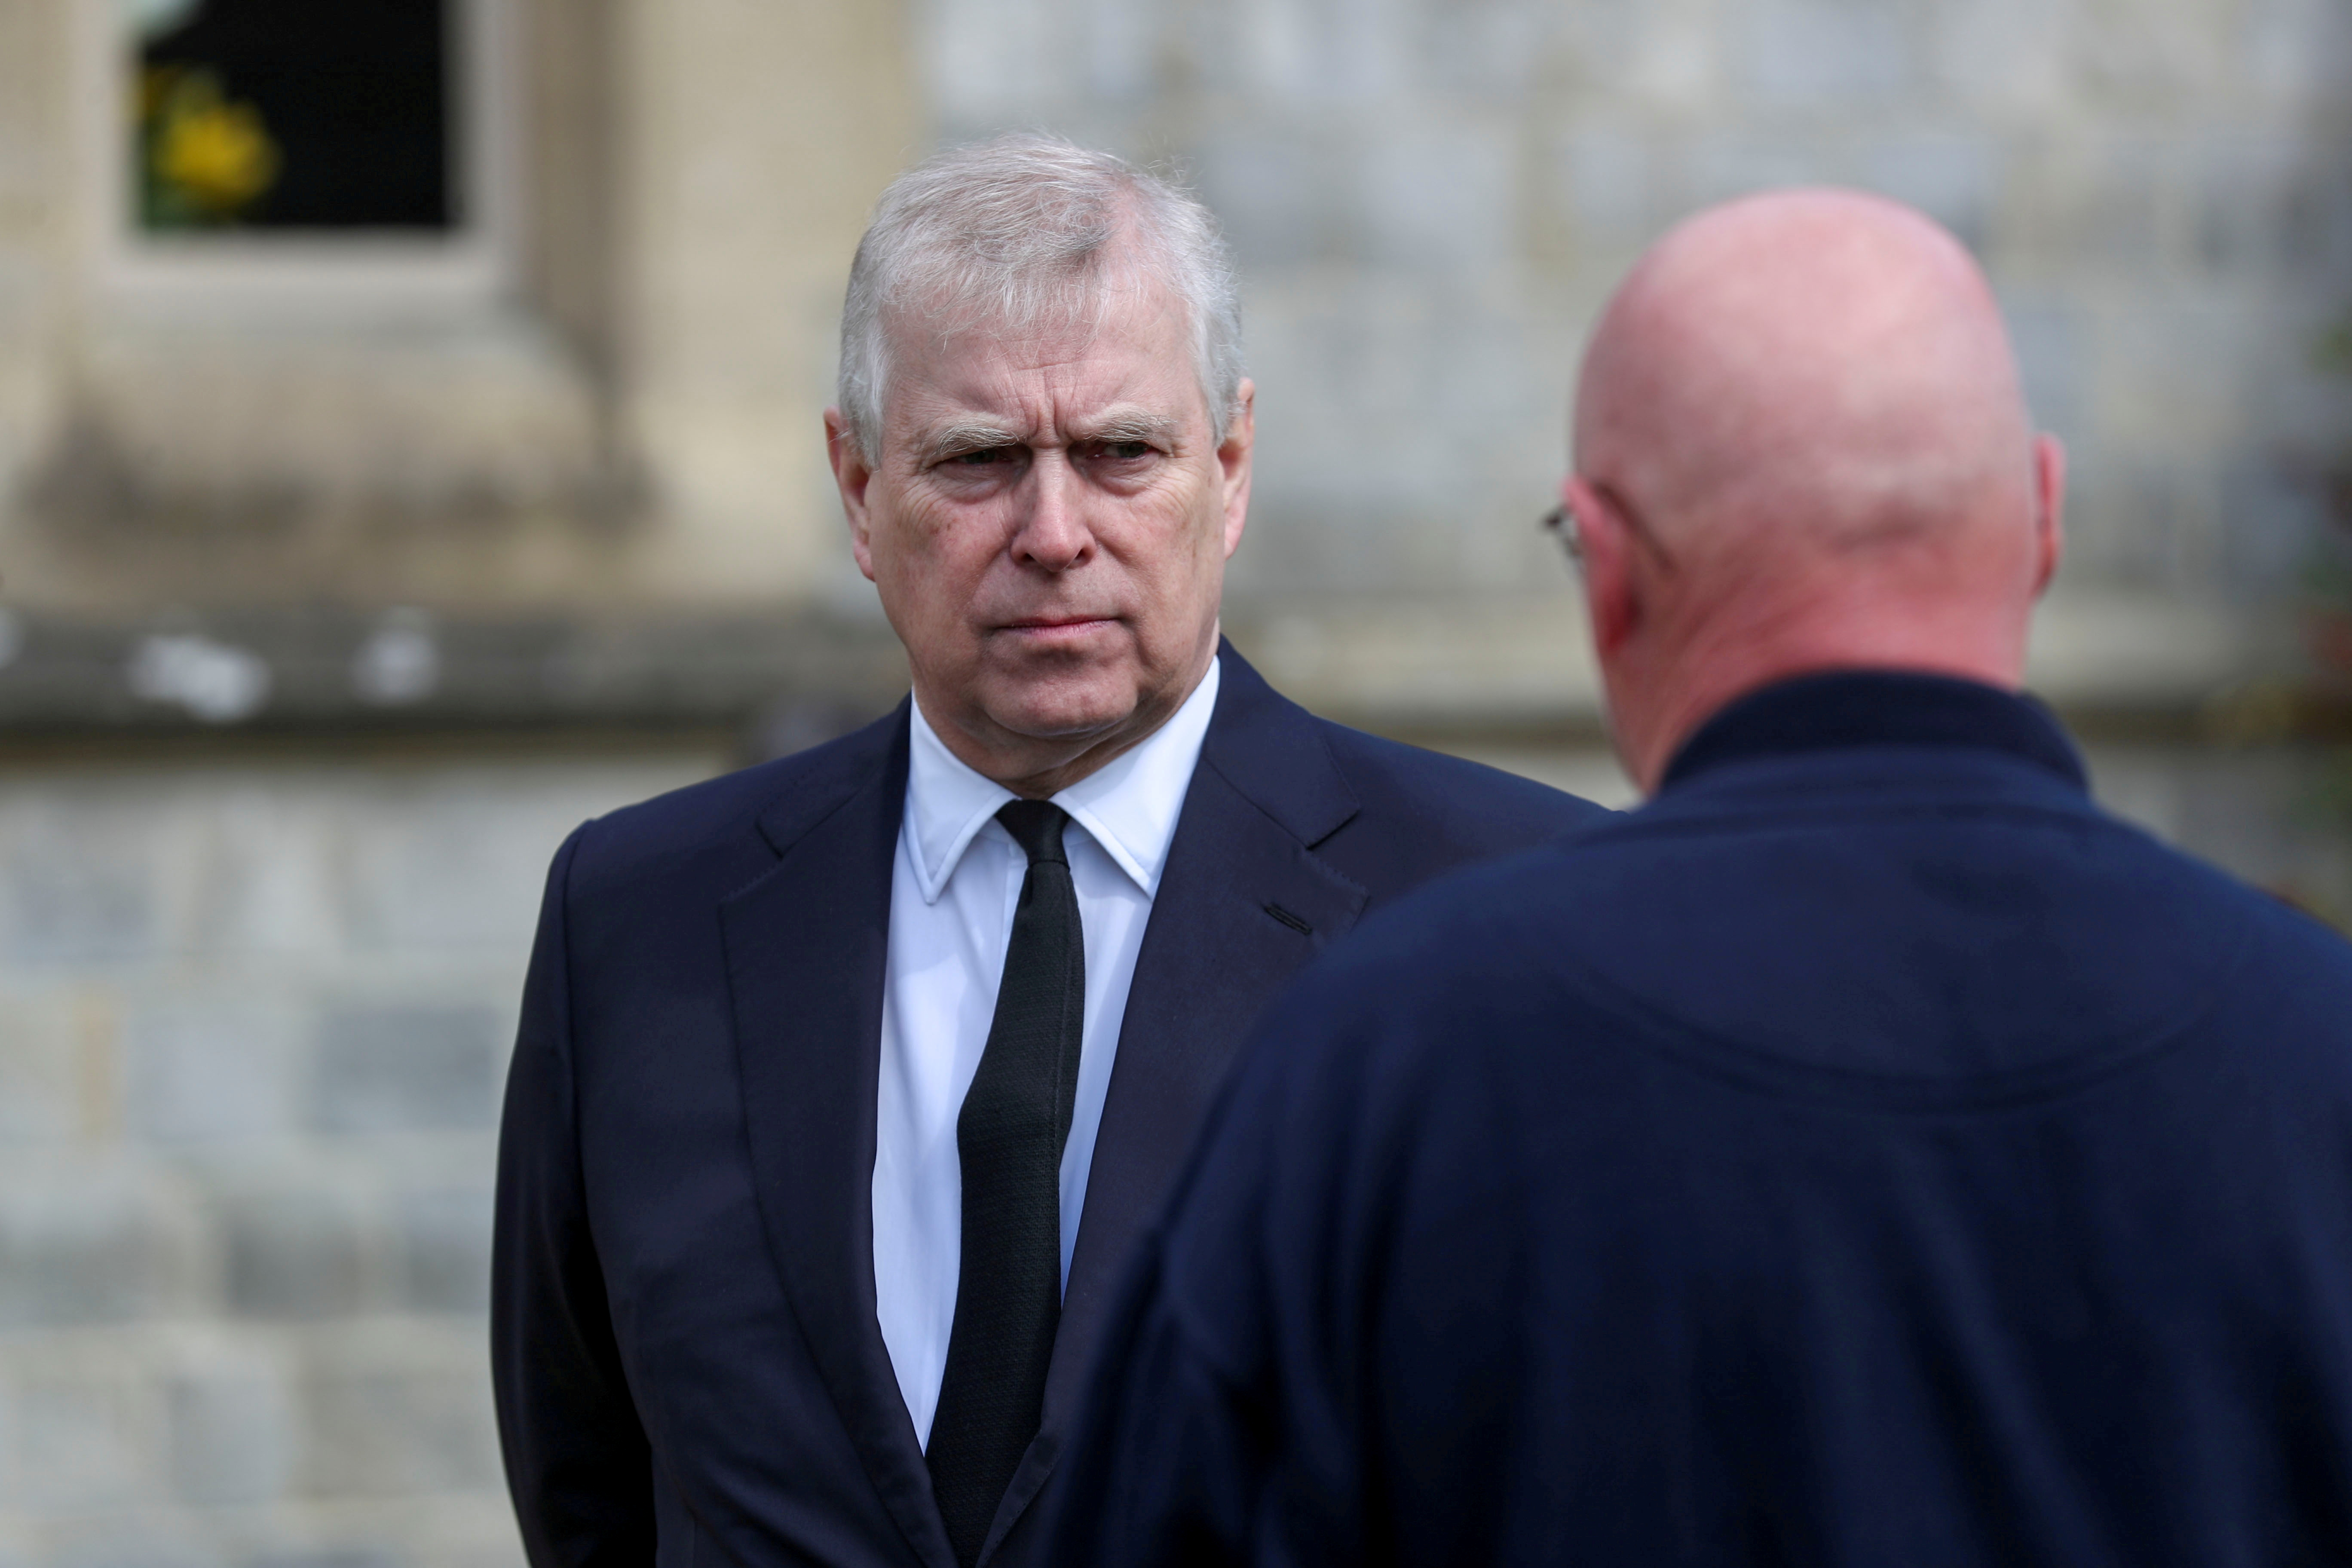 Britain's Prince Andrew attends Sunday service at the Royal Chapel of All Saints at Windsor Great Park, Britain following Friday's death of his father Prince Philip at age 99, April 11, 2021. Steve Parsons/PA Wire/Pool via REUTERS REFILE 